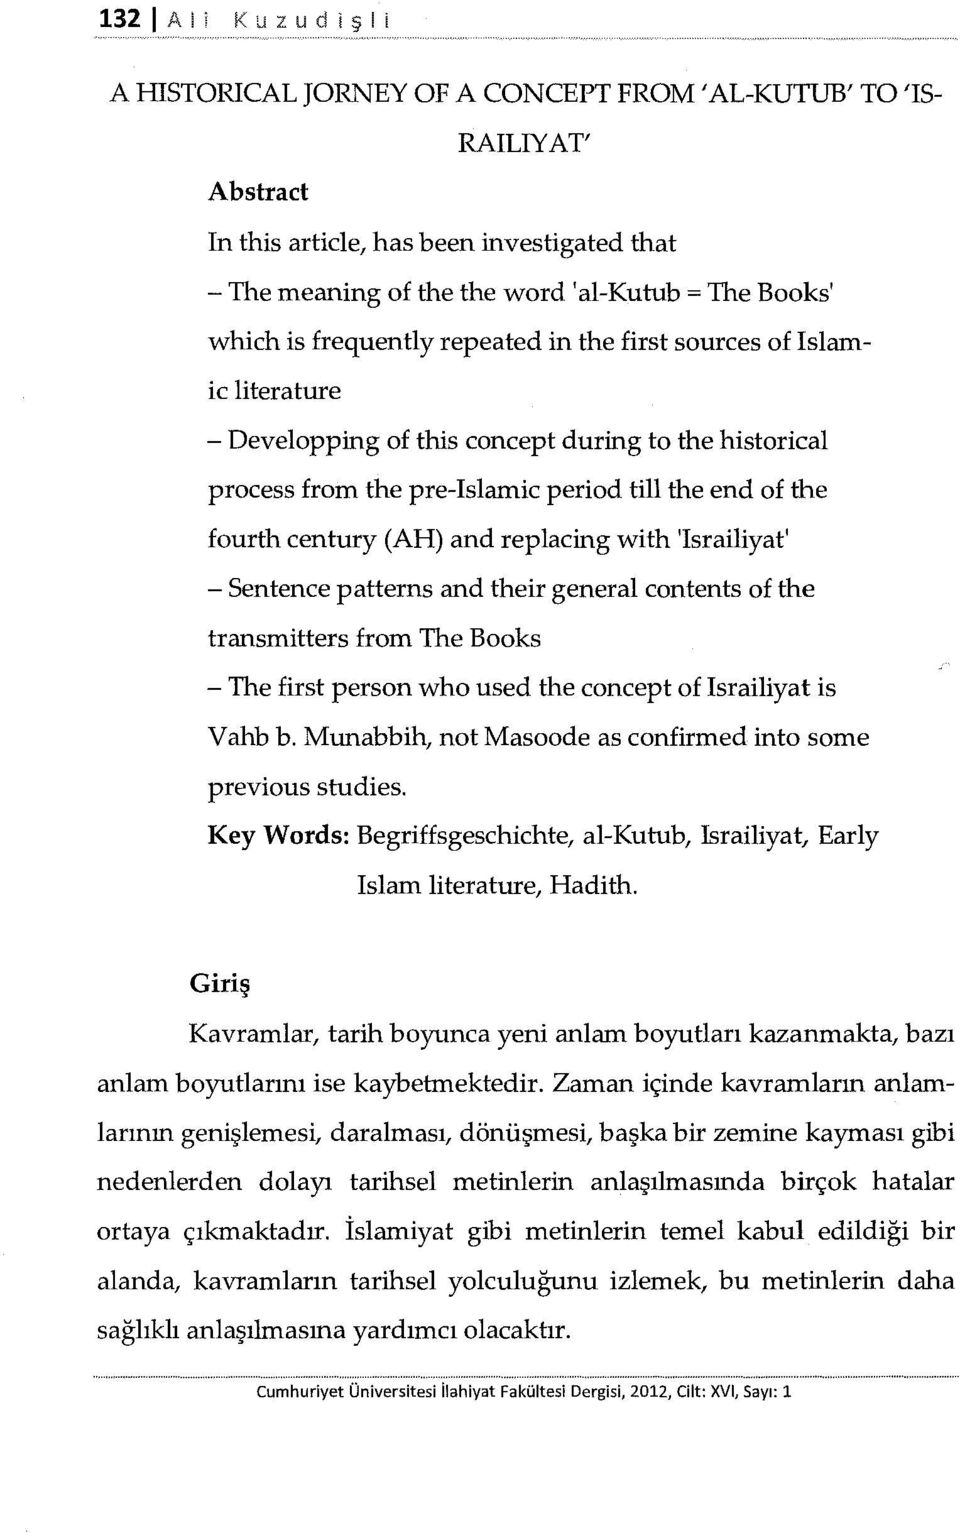 (AH) and replacing with 'Israiliyat' - Sentence patterns and their general contents of the transmitters from The Books - The first person who used the concept of ısrailiyat is Vahb b.